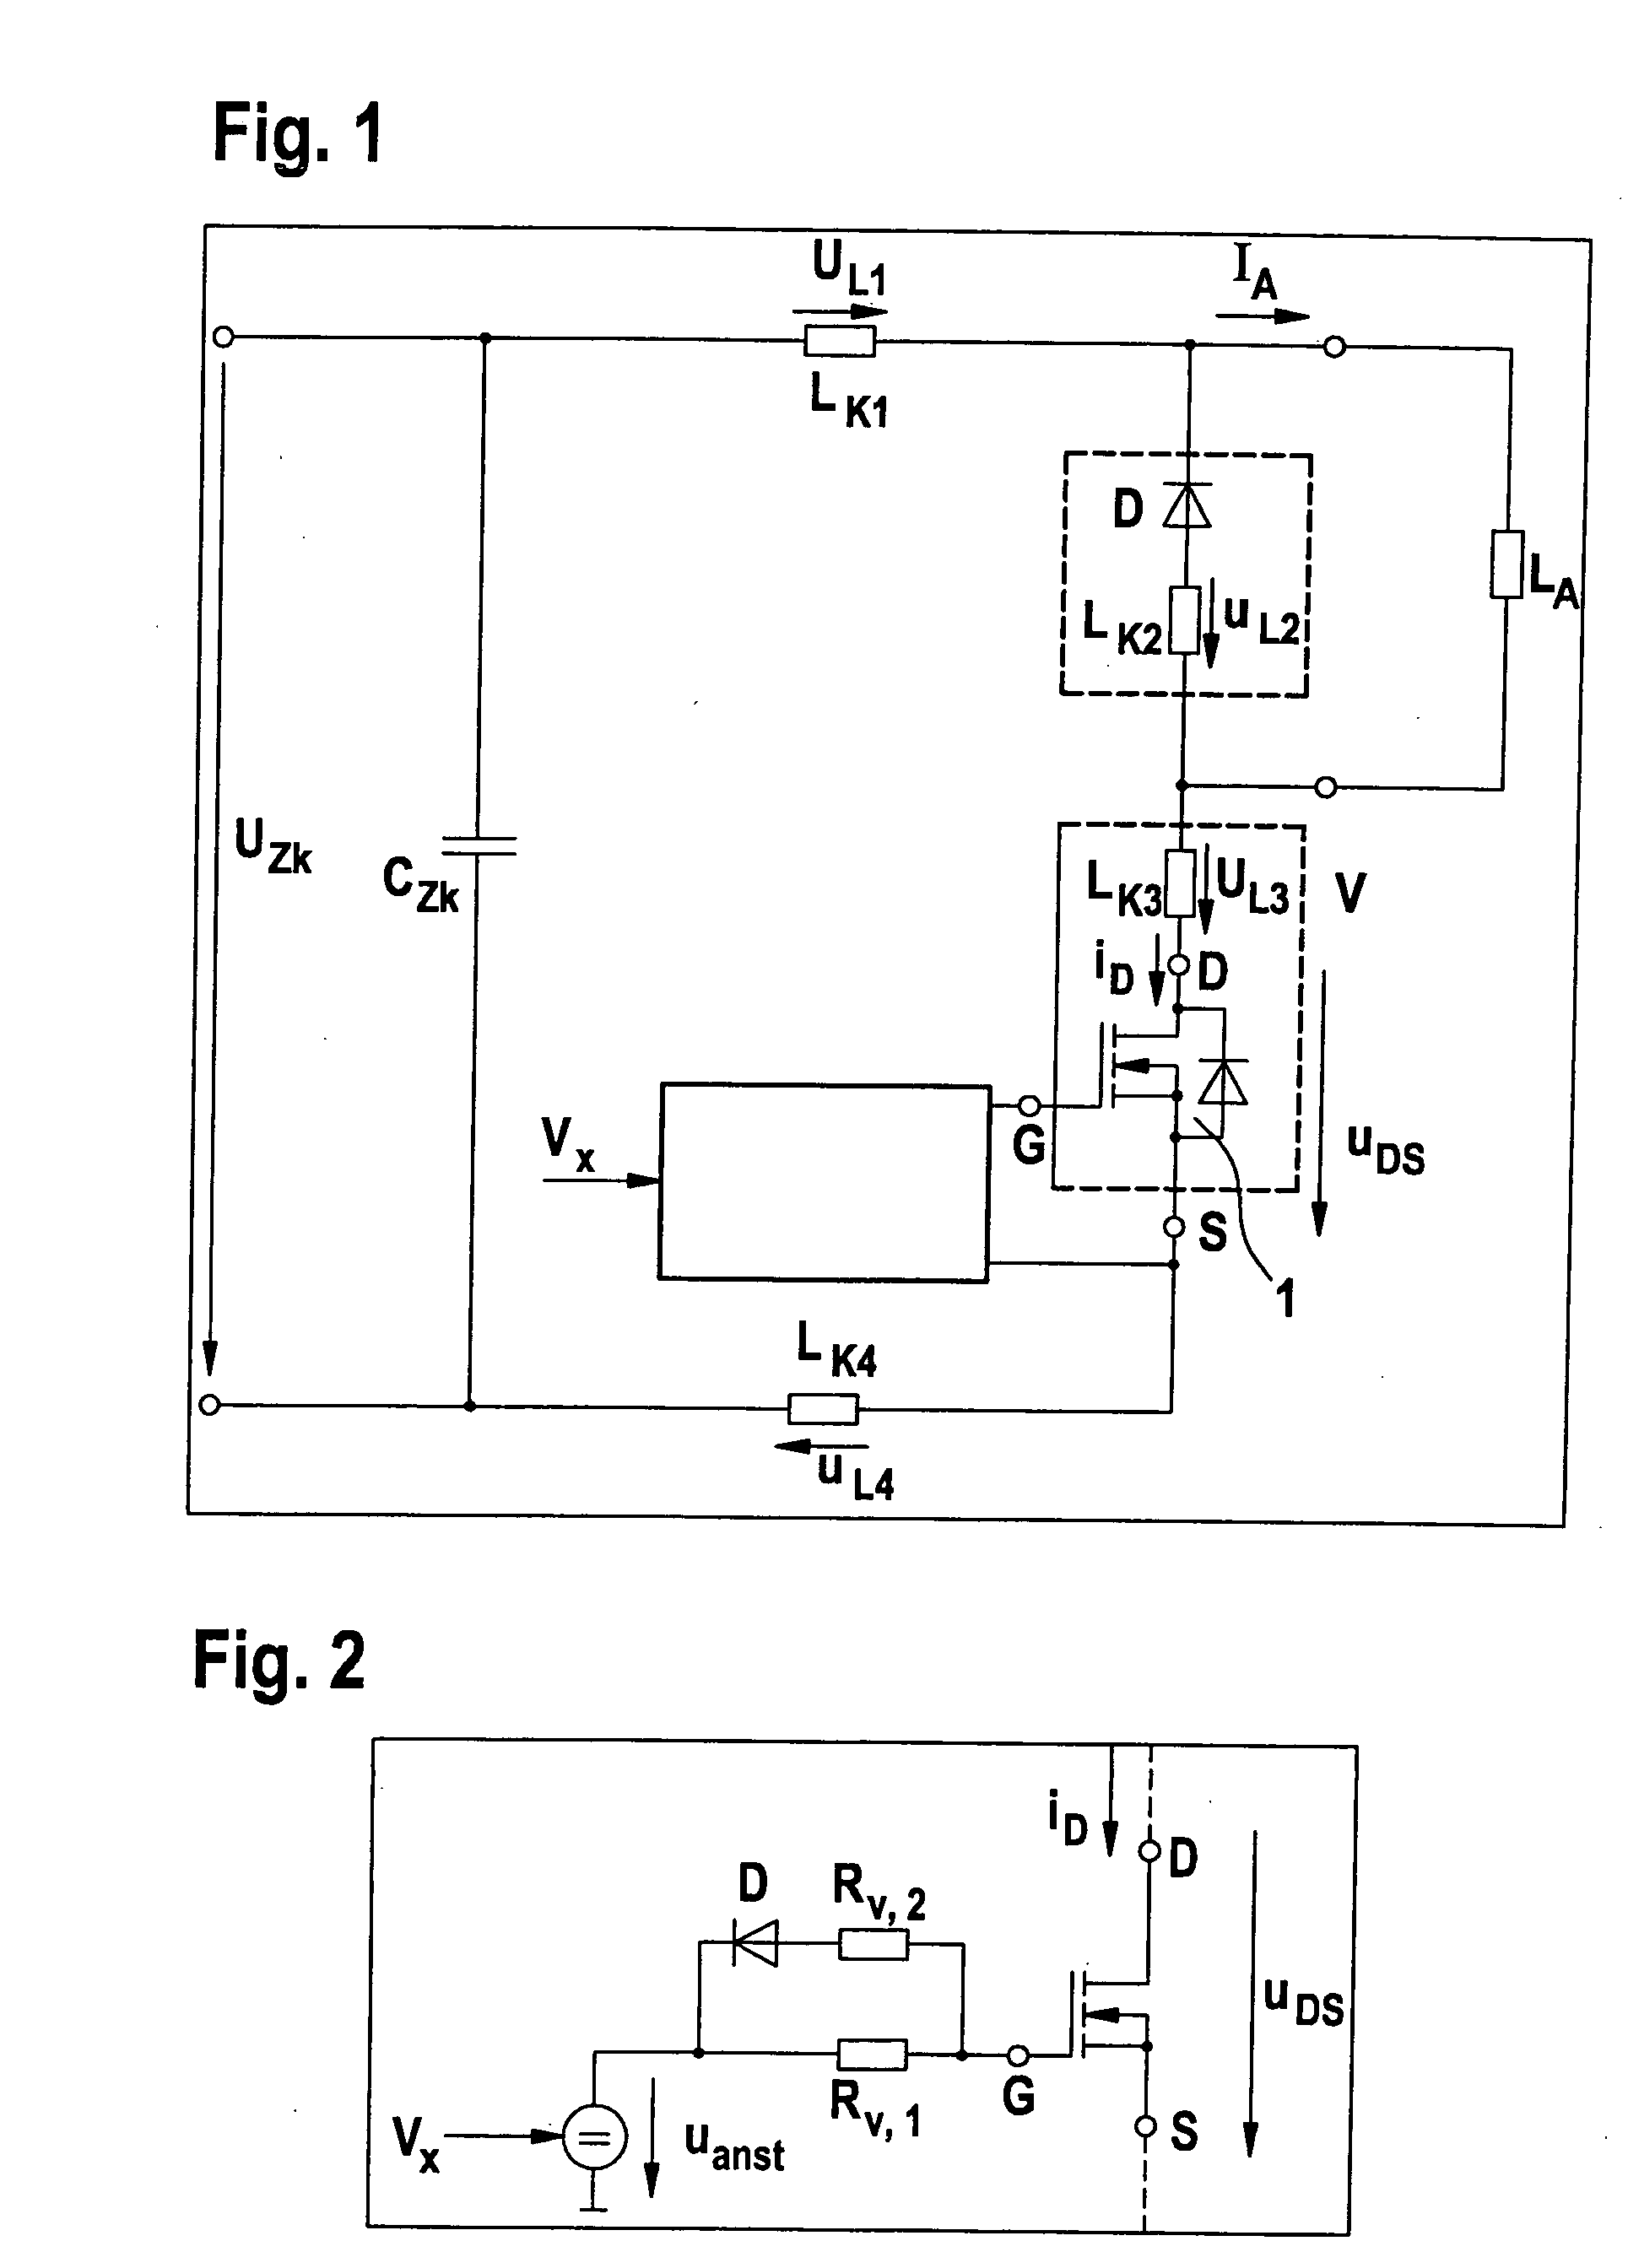 Control Circuit for Controlling an Electronic Circuit and Method for This